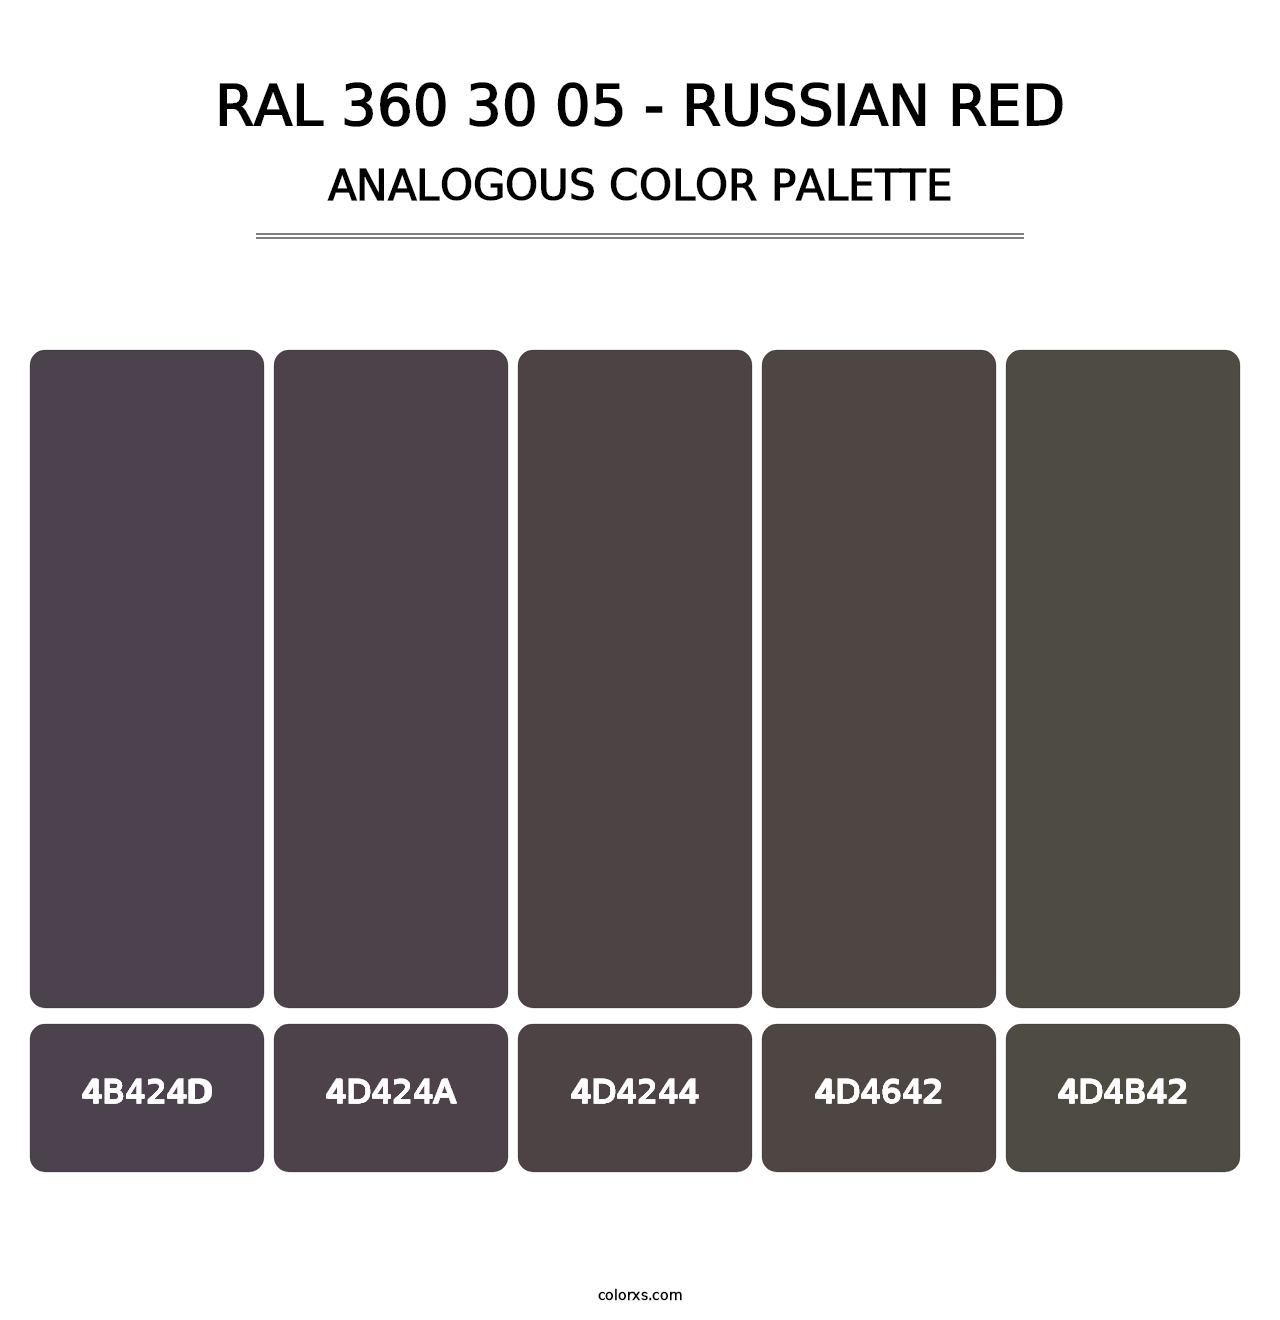 RAL 360 30 05 - Russian Red - Analogous Color Palette